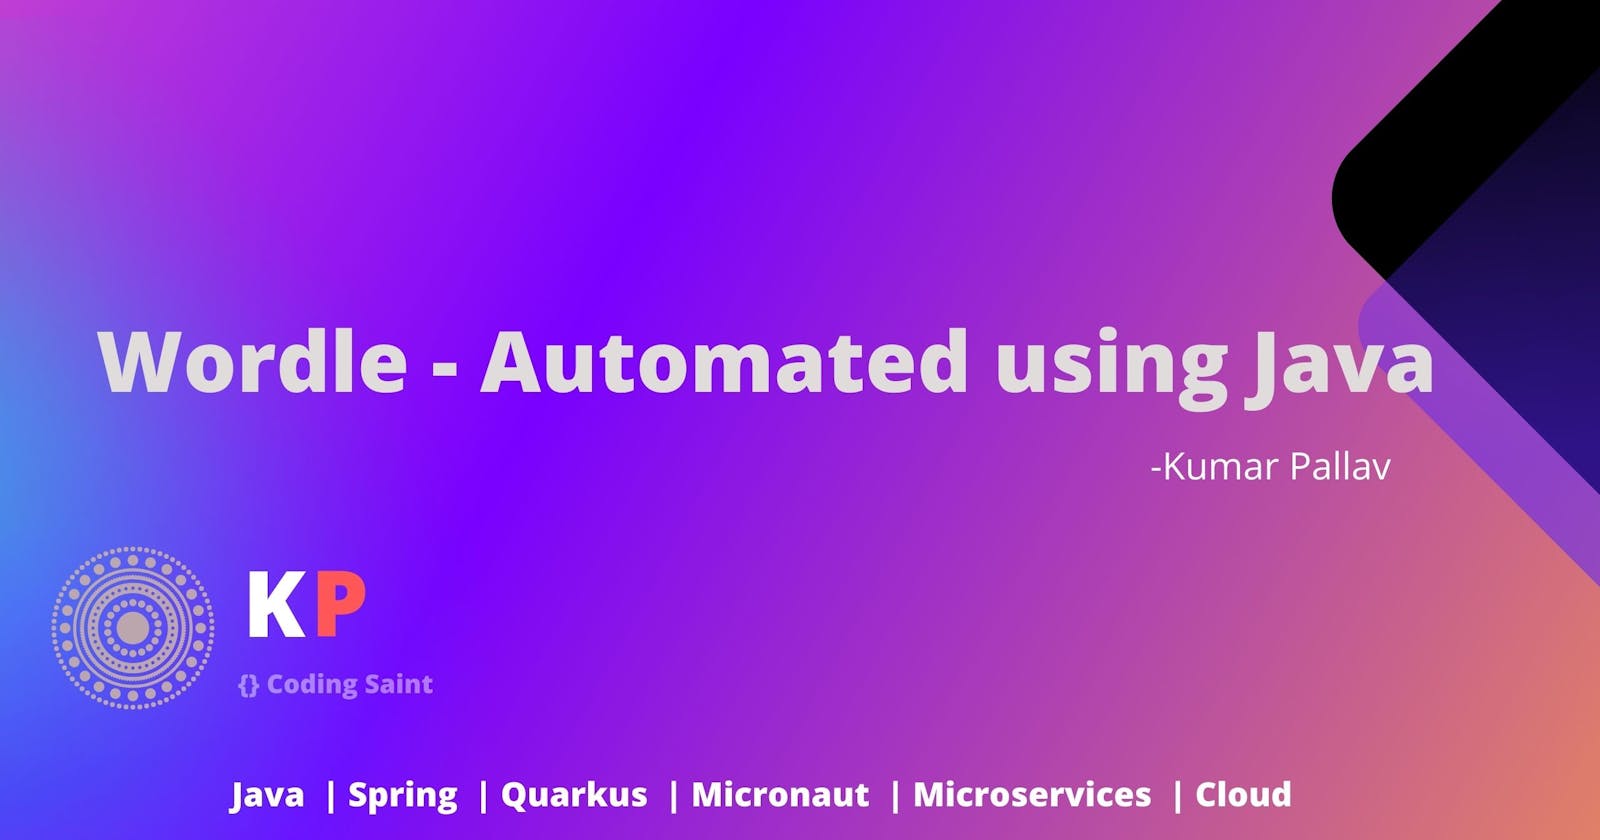 Why & How I automated Wordle